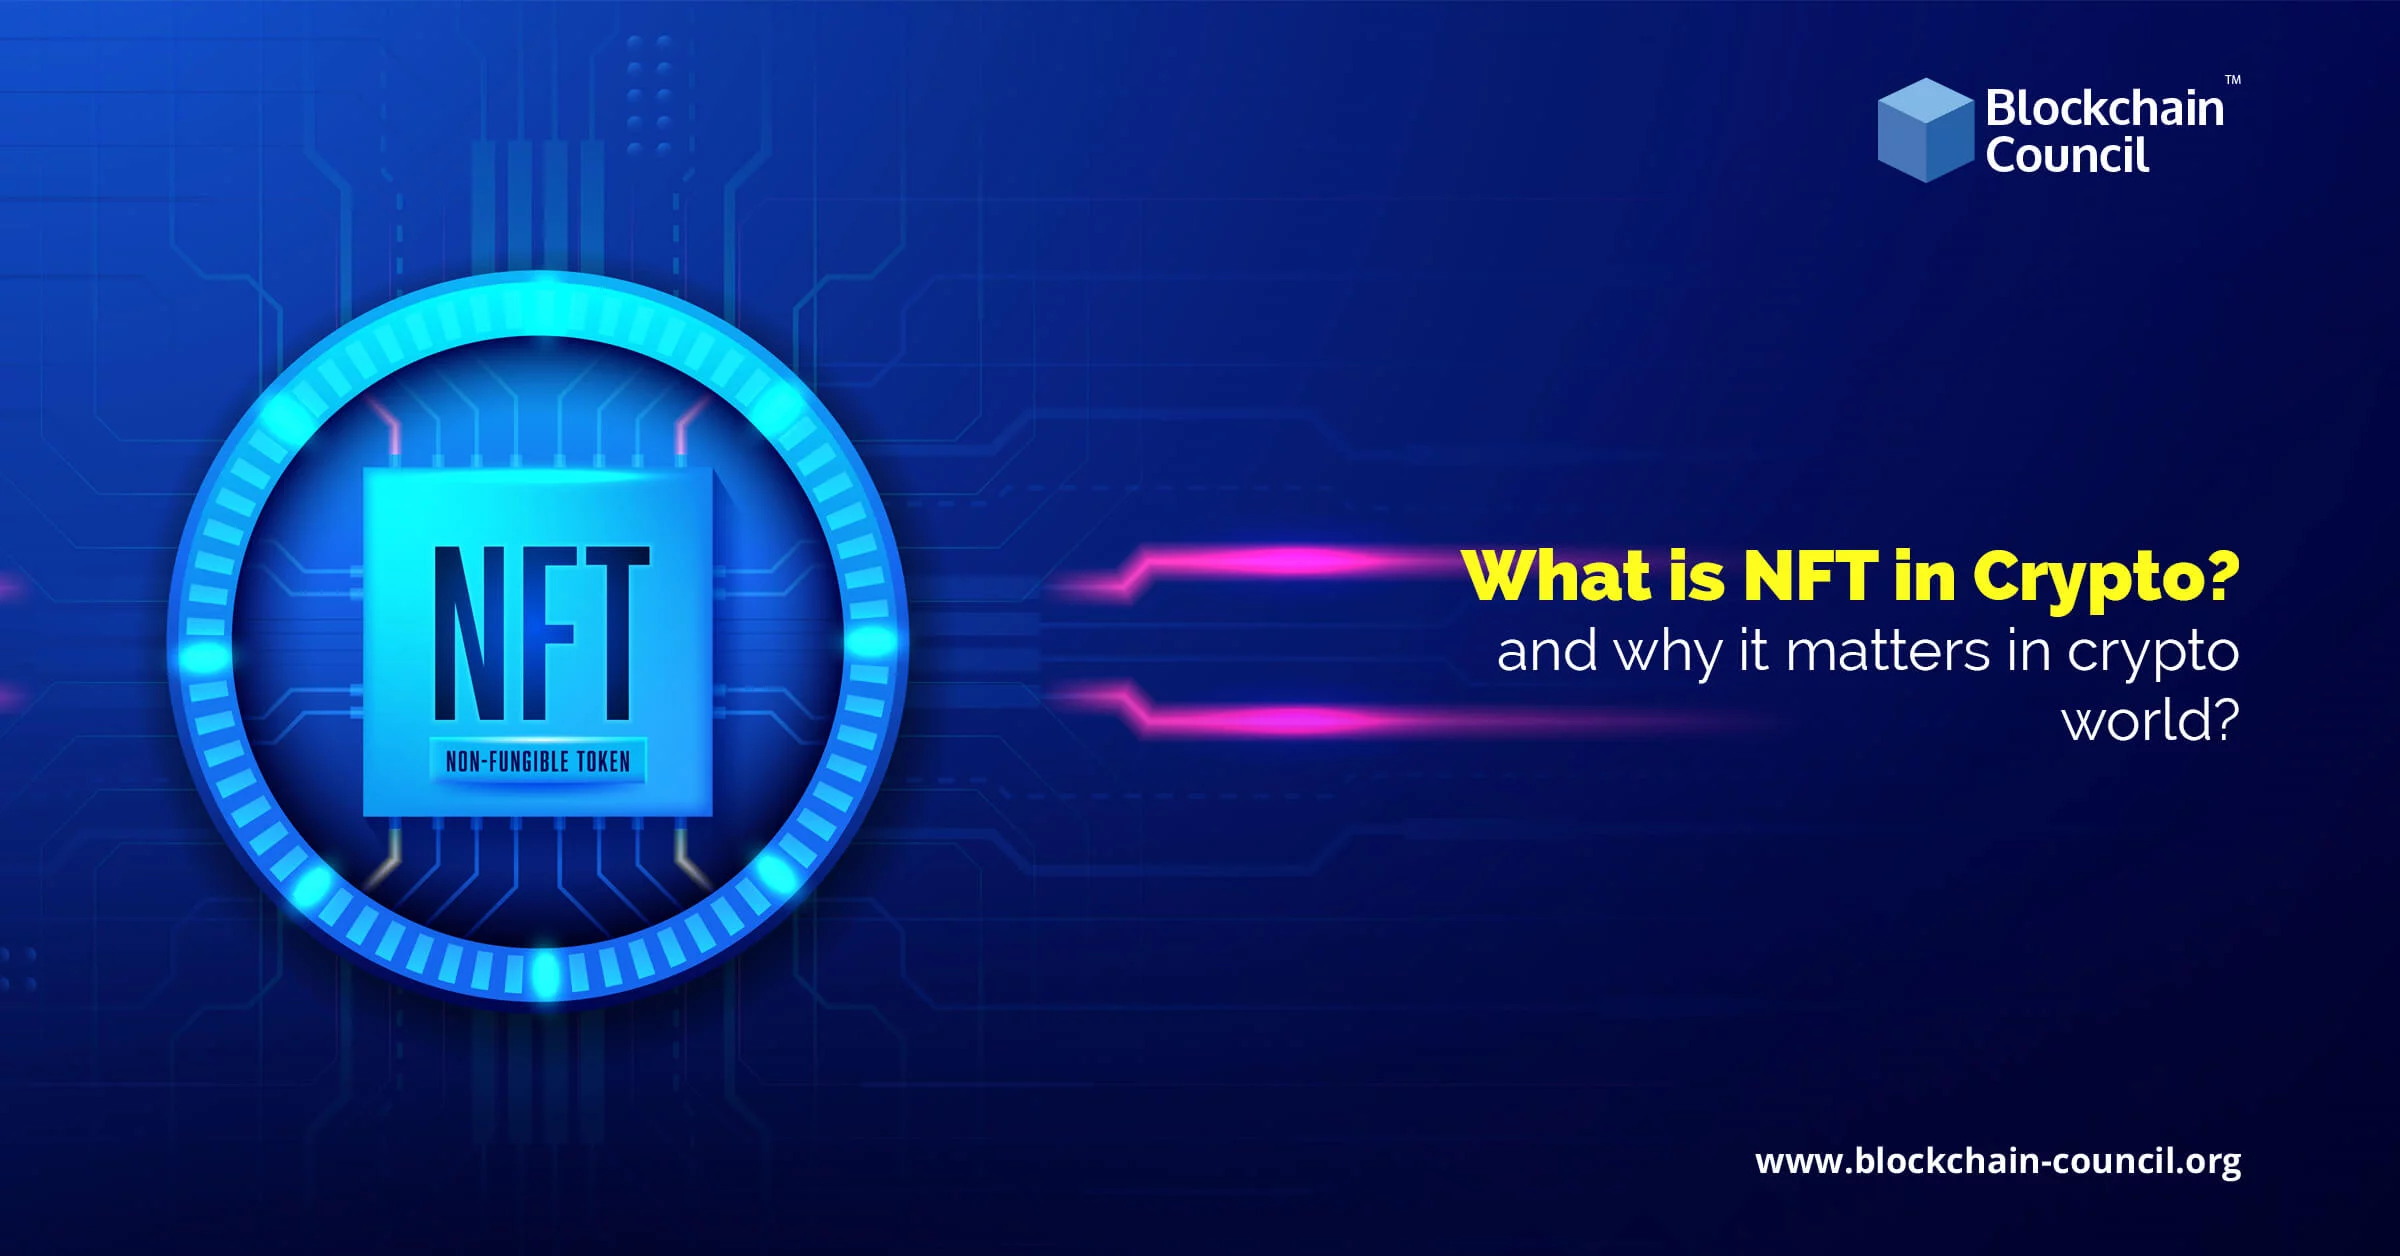 which crypto is used for nft